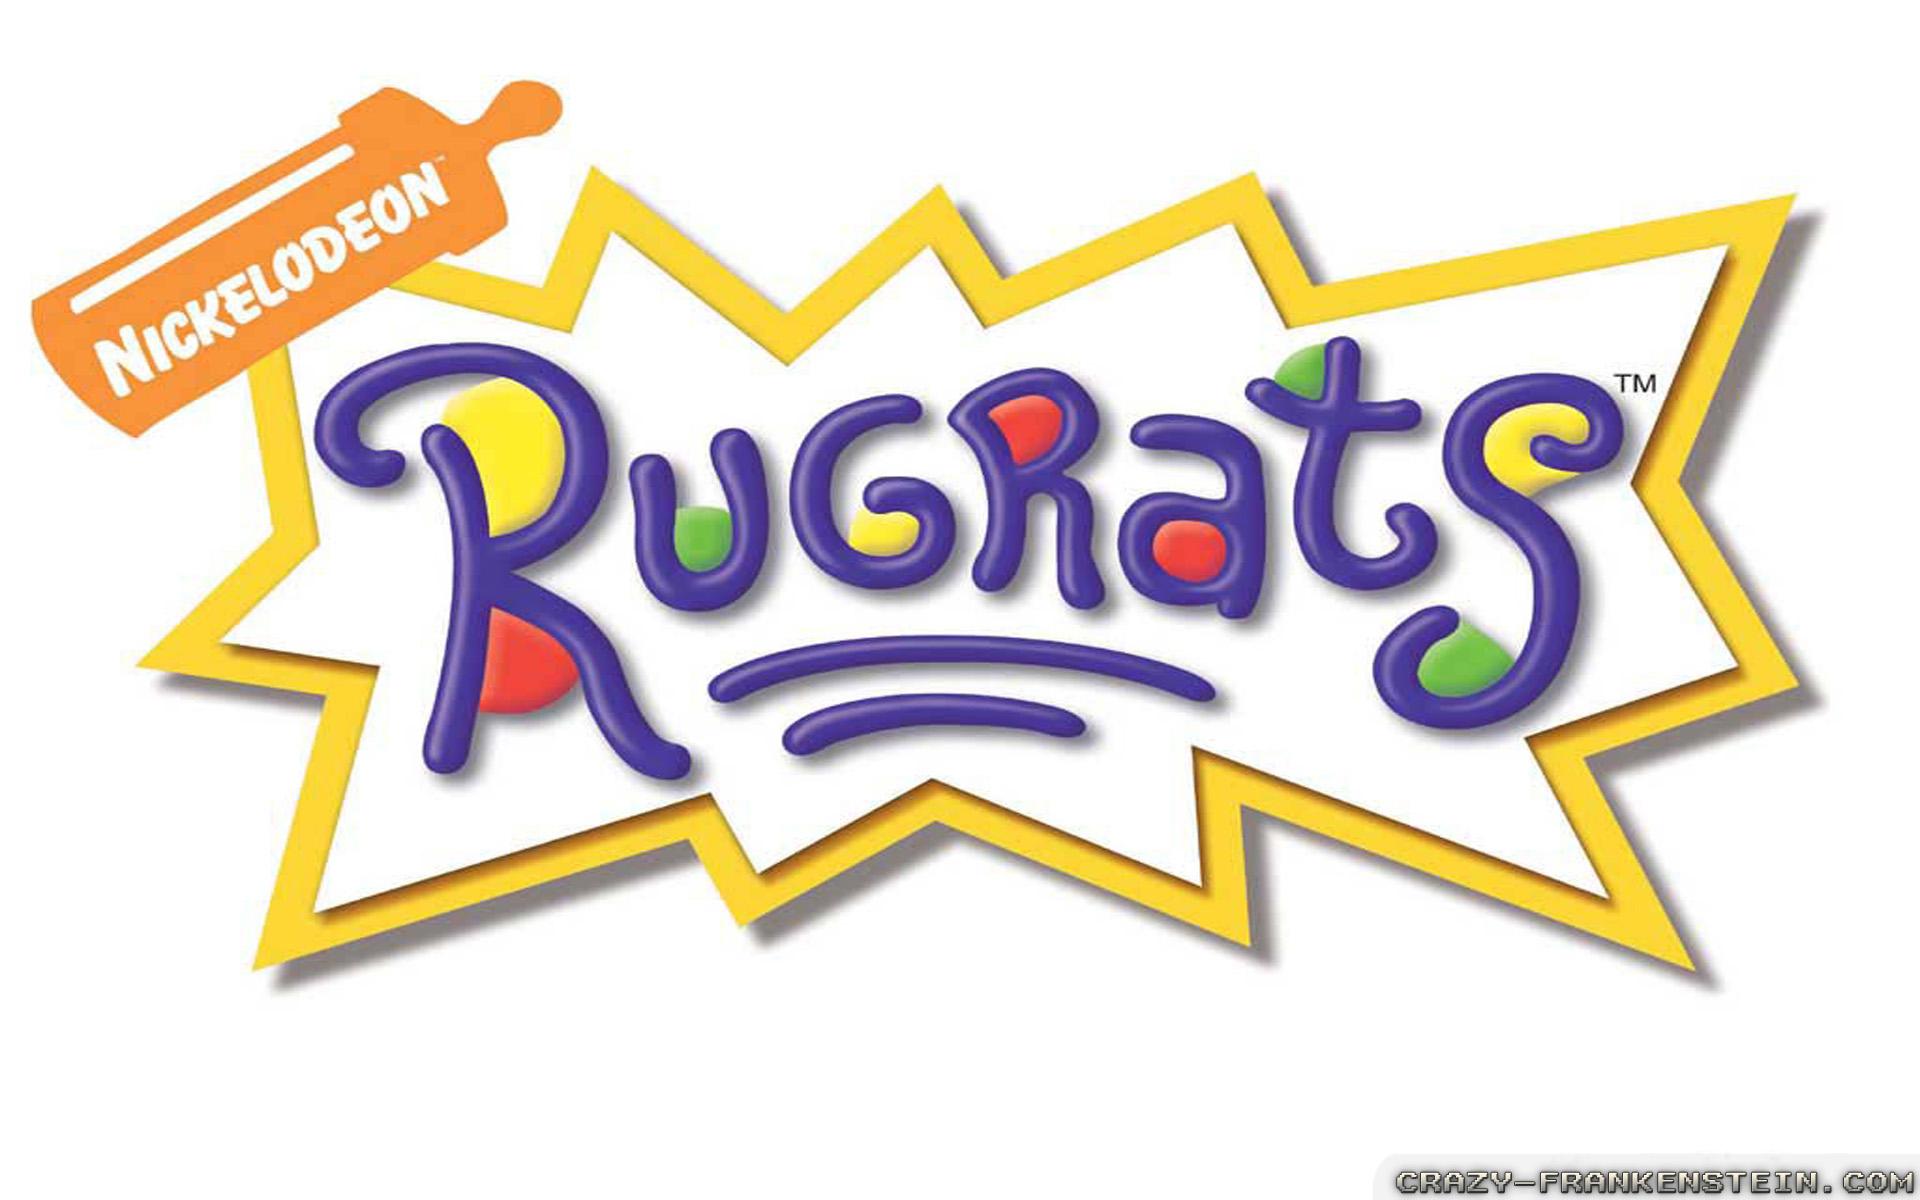 Rugrats are back!